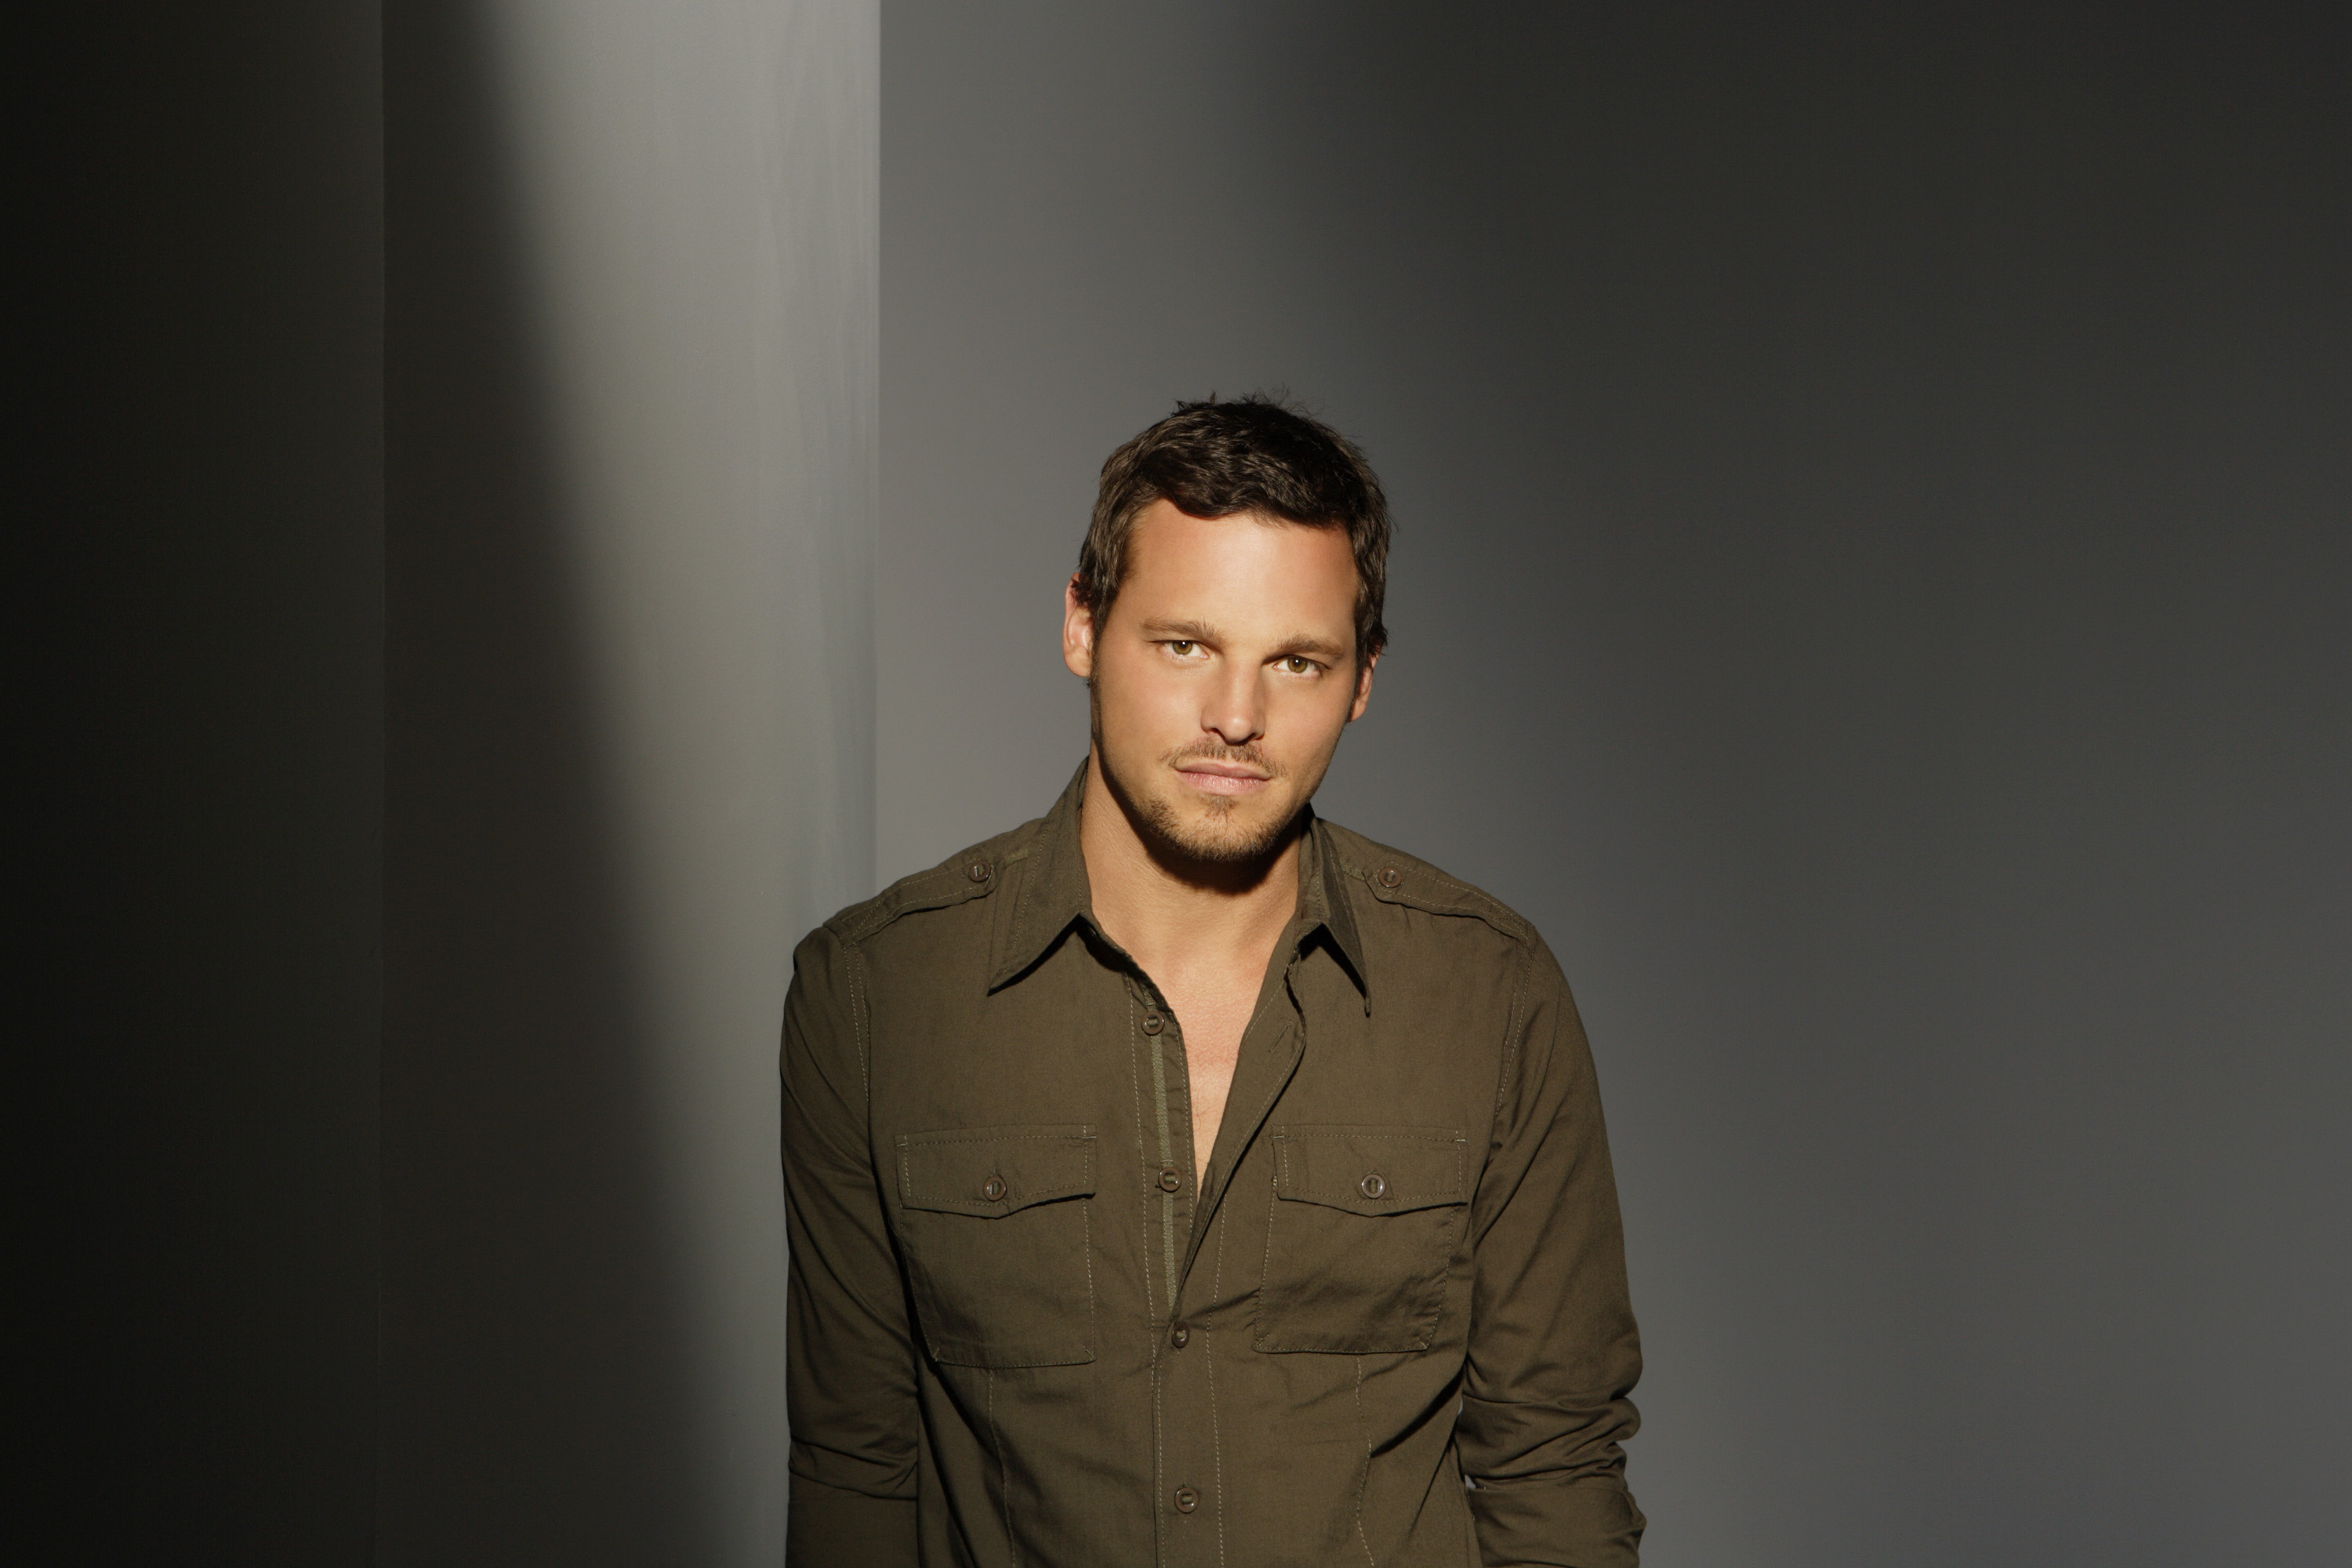 'Grey's Anatomy': Justin Chambers as Alex Karev smiling in a brown button-up top